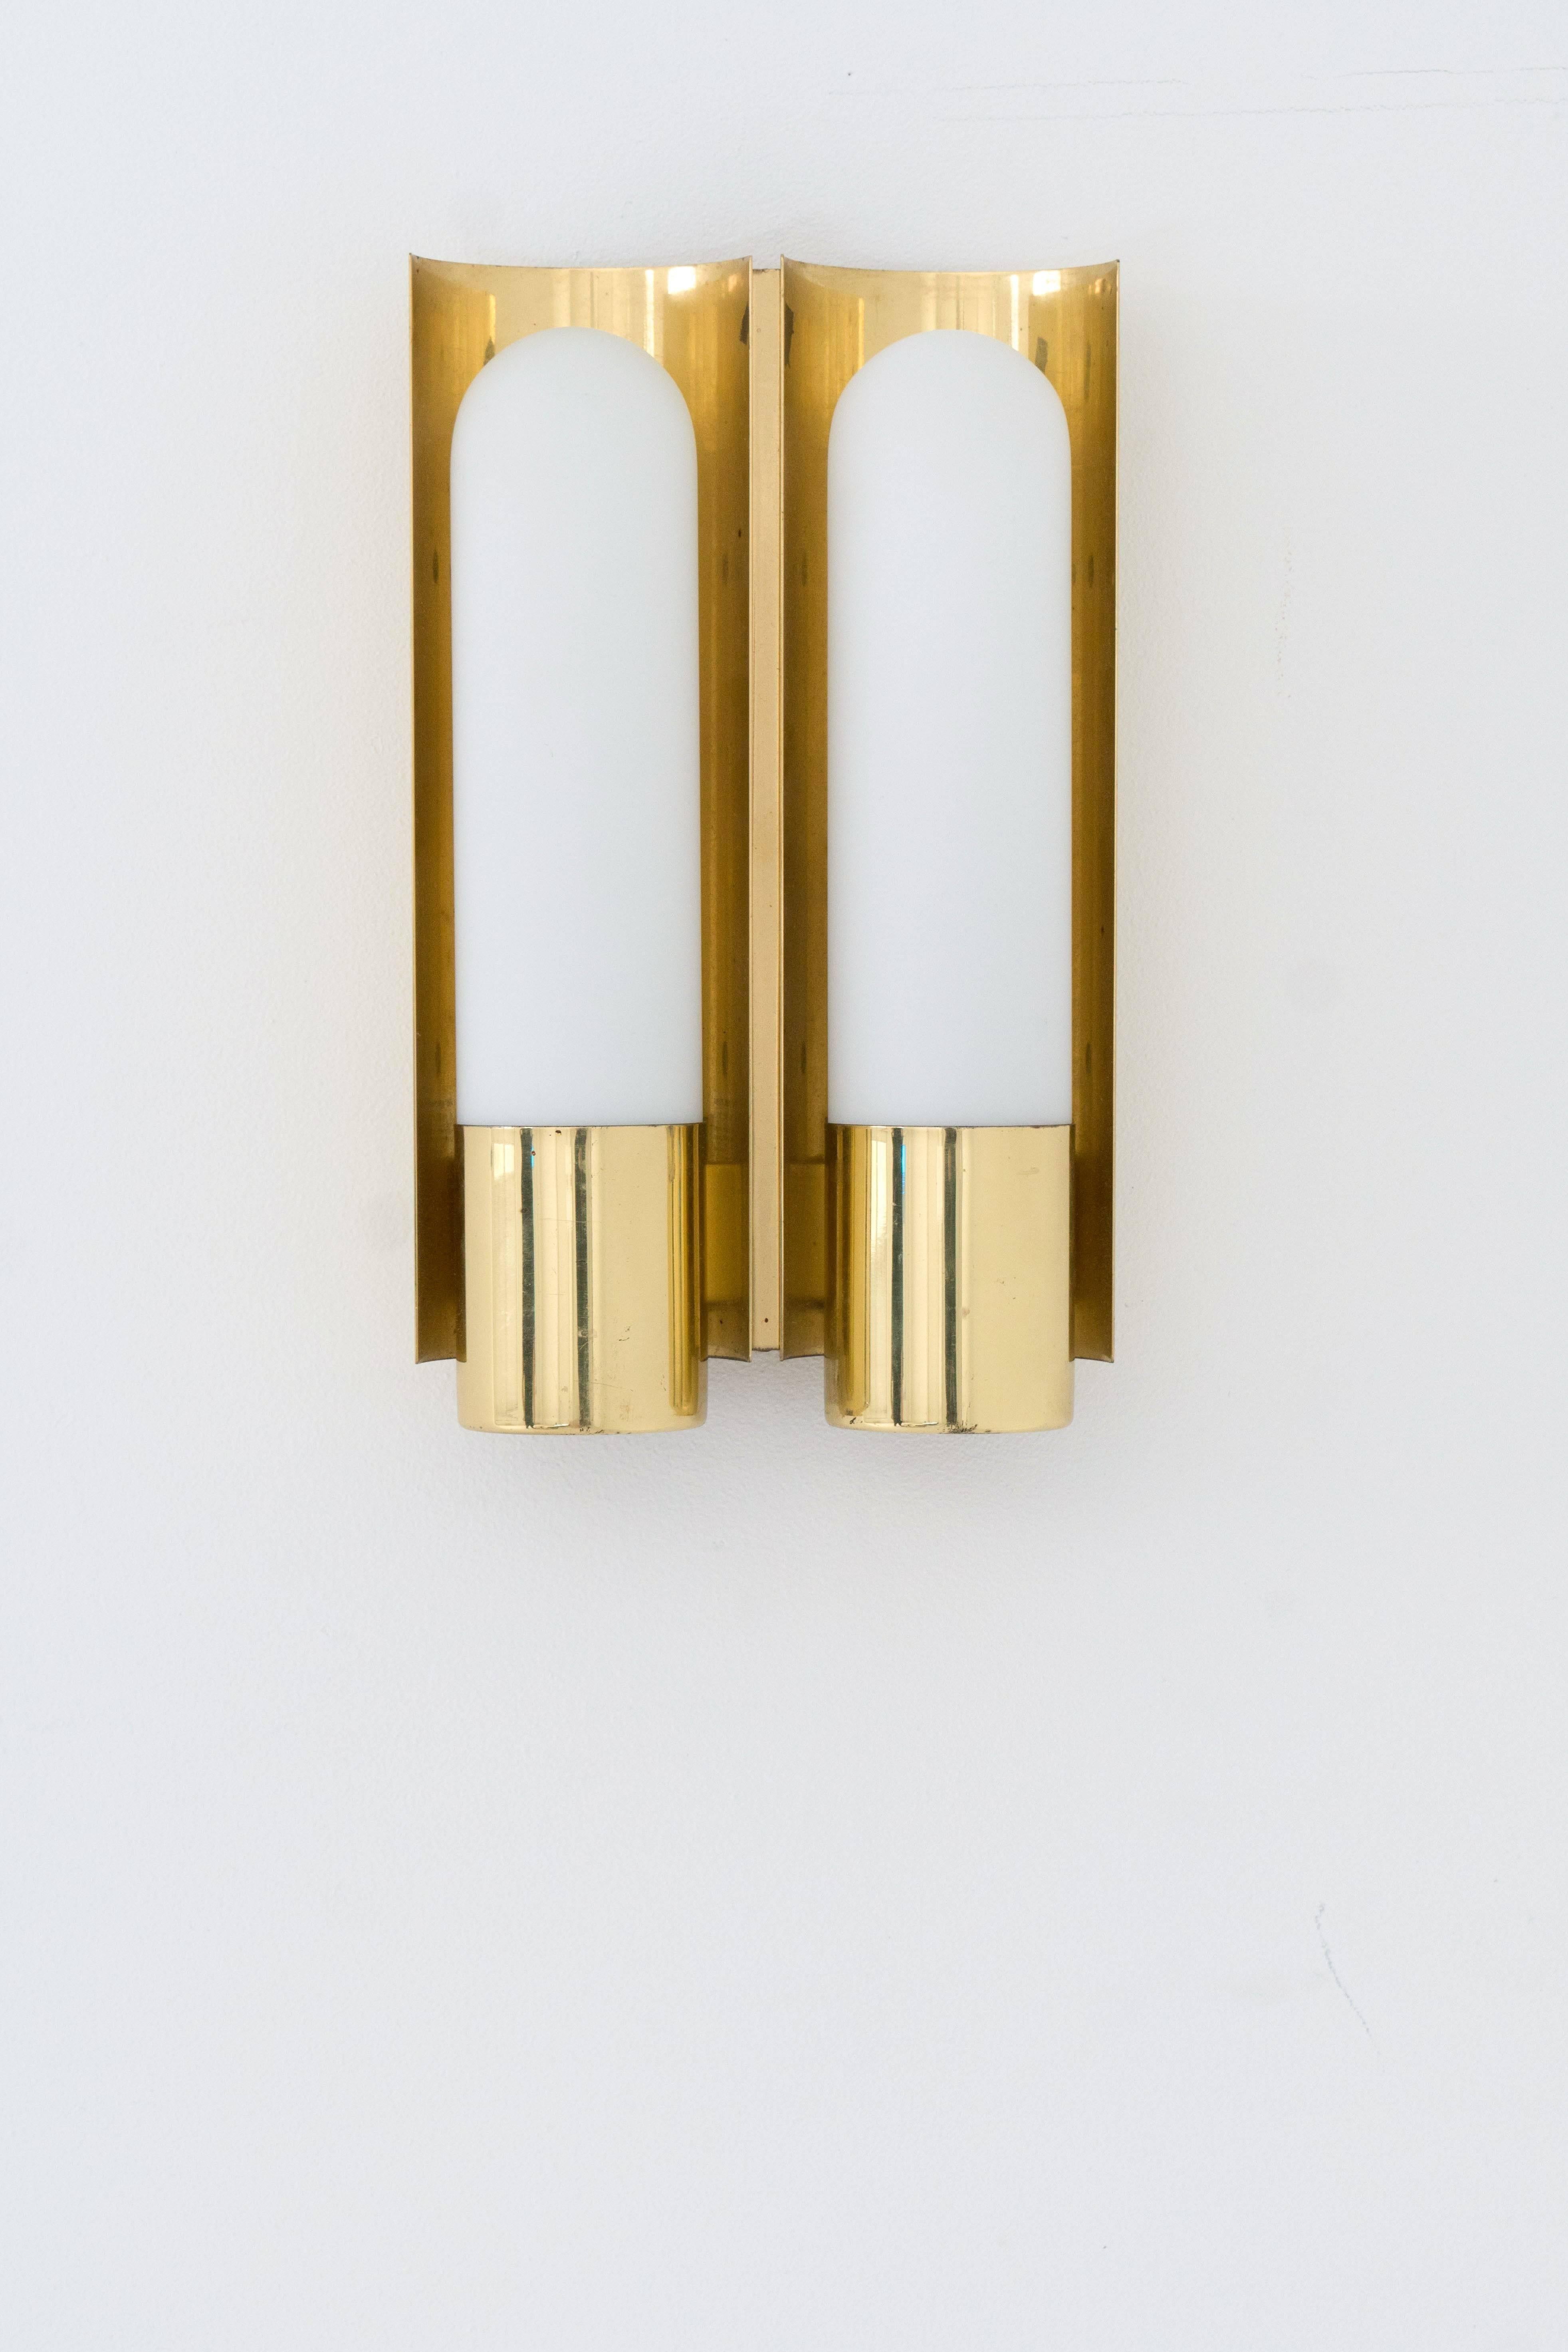 Very heavy and substantial brass double wall sconce. 